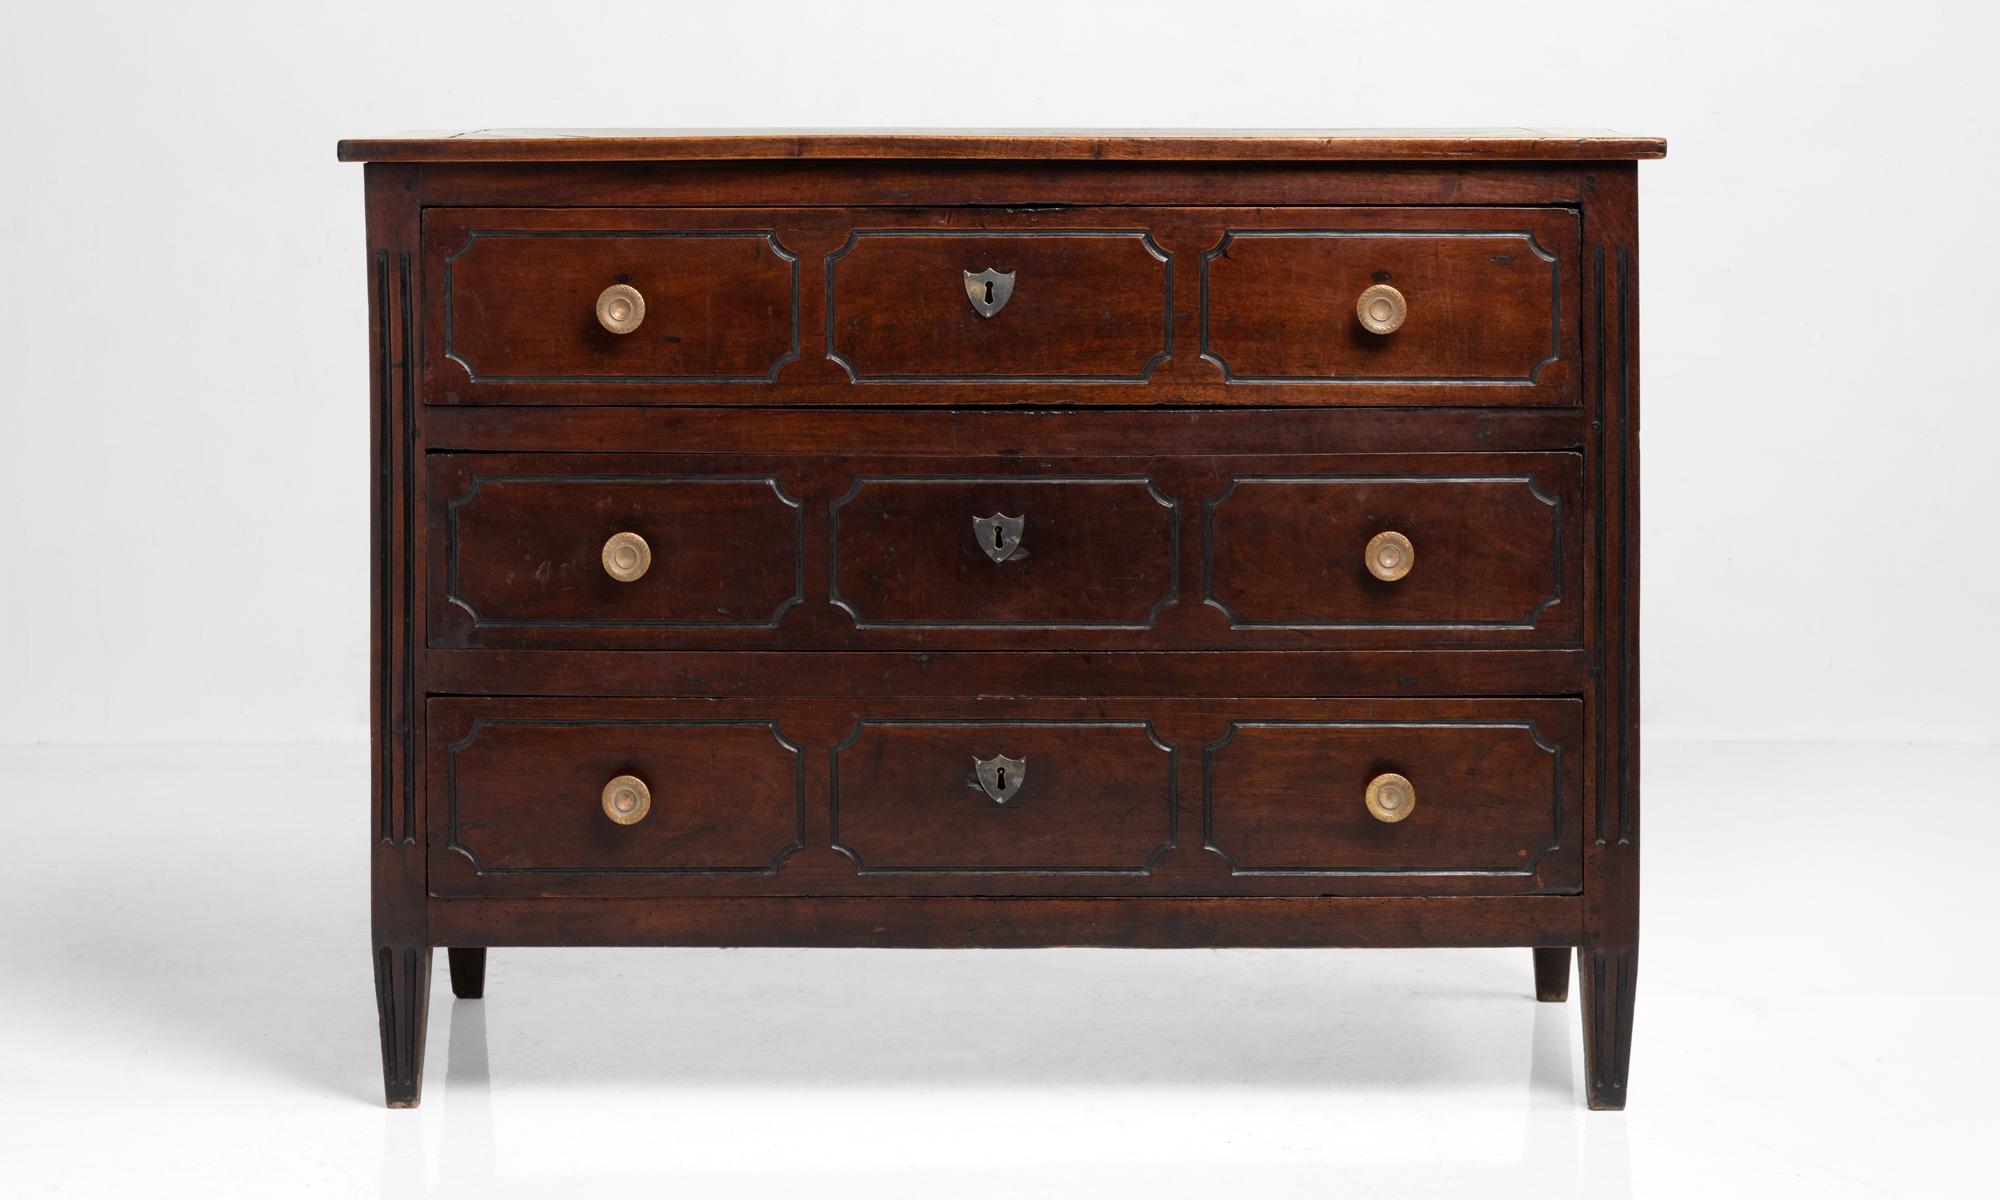 Walnut commode, France, 18th century.

Beautifully patinated form with circular pulls and (3) drawers.